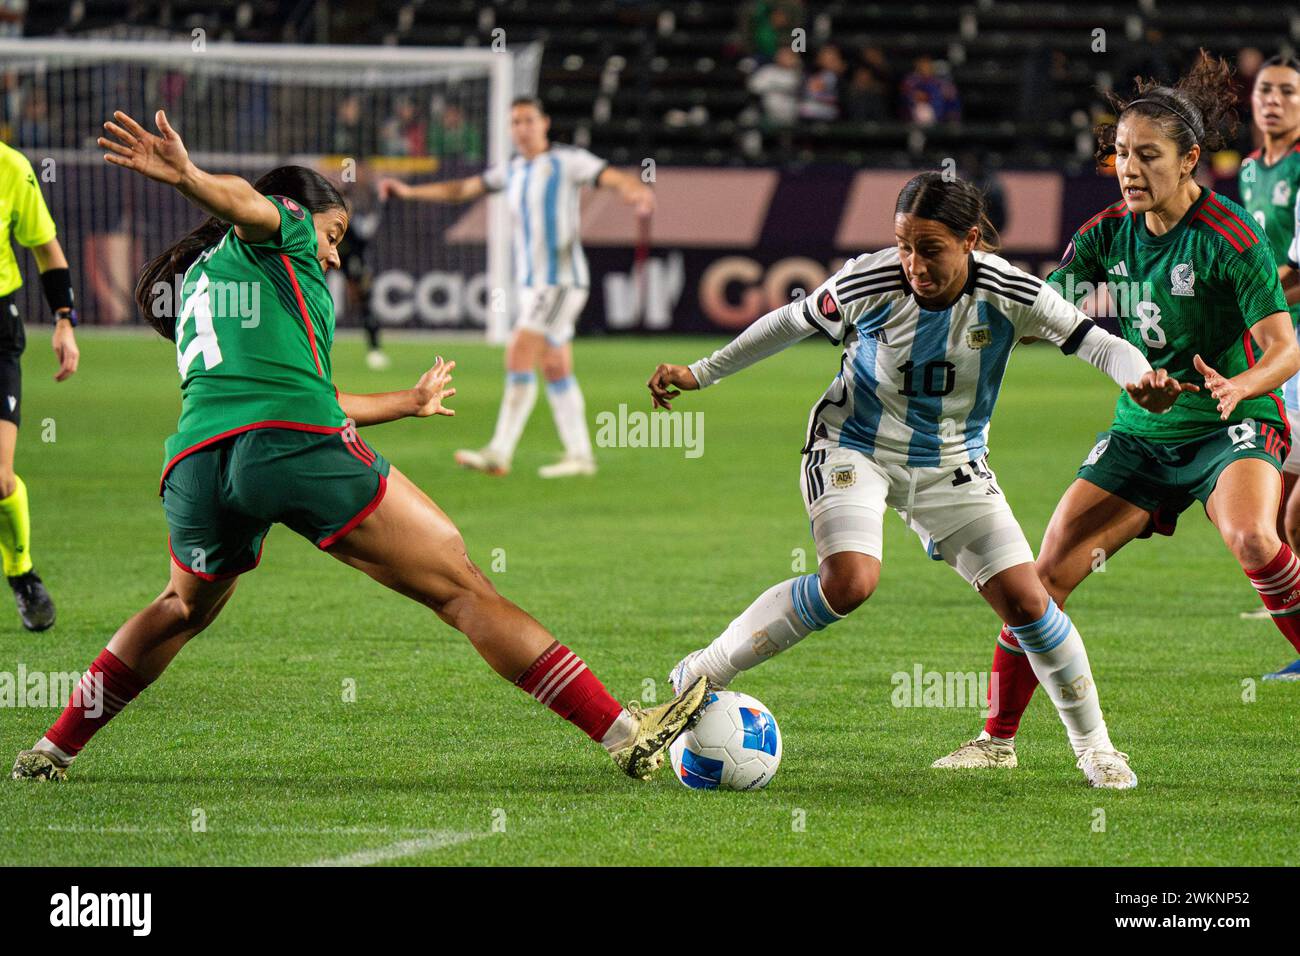 Argentina midfielder Dalila Ippólito (10) is challenged by Mexico defender Rebeca Bernal (4) and midfielder Alexia Delgado (8) during the Concacaf W G Stock Photo